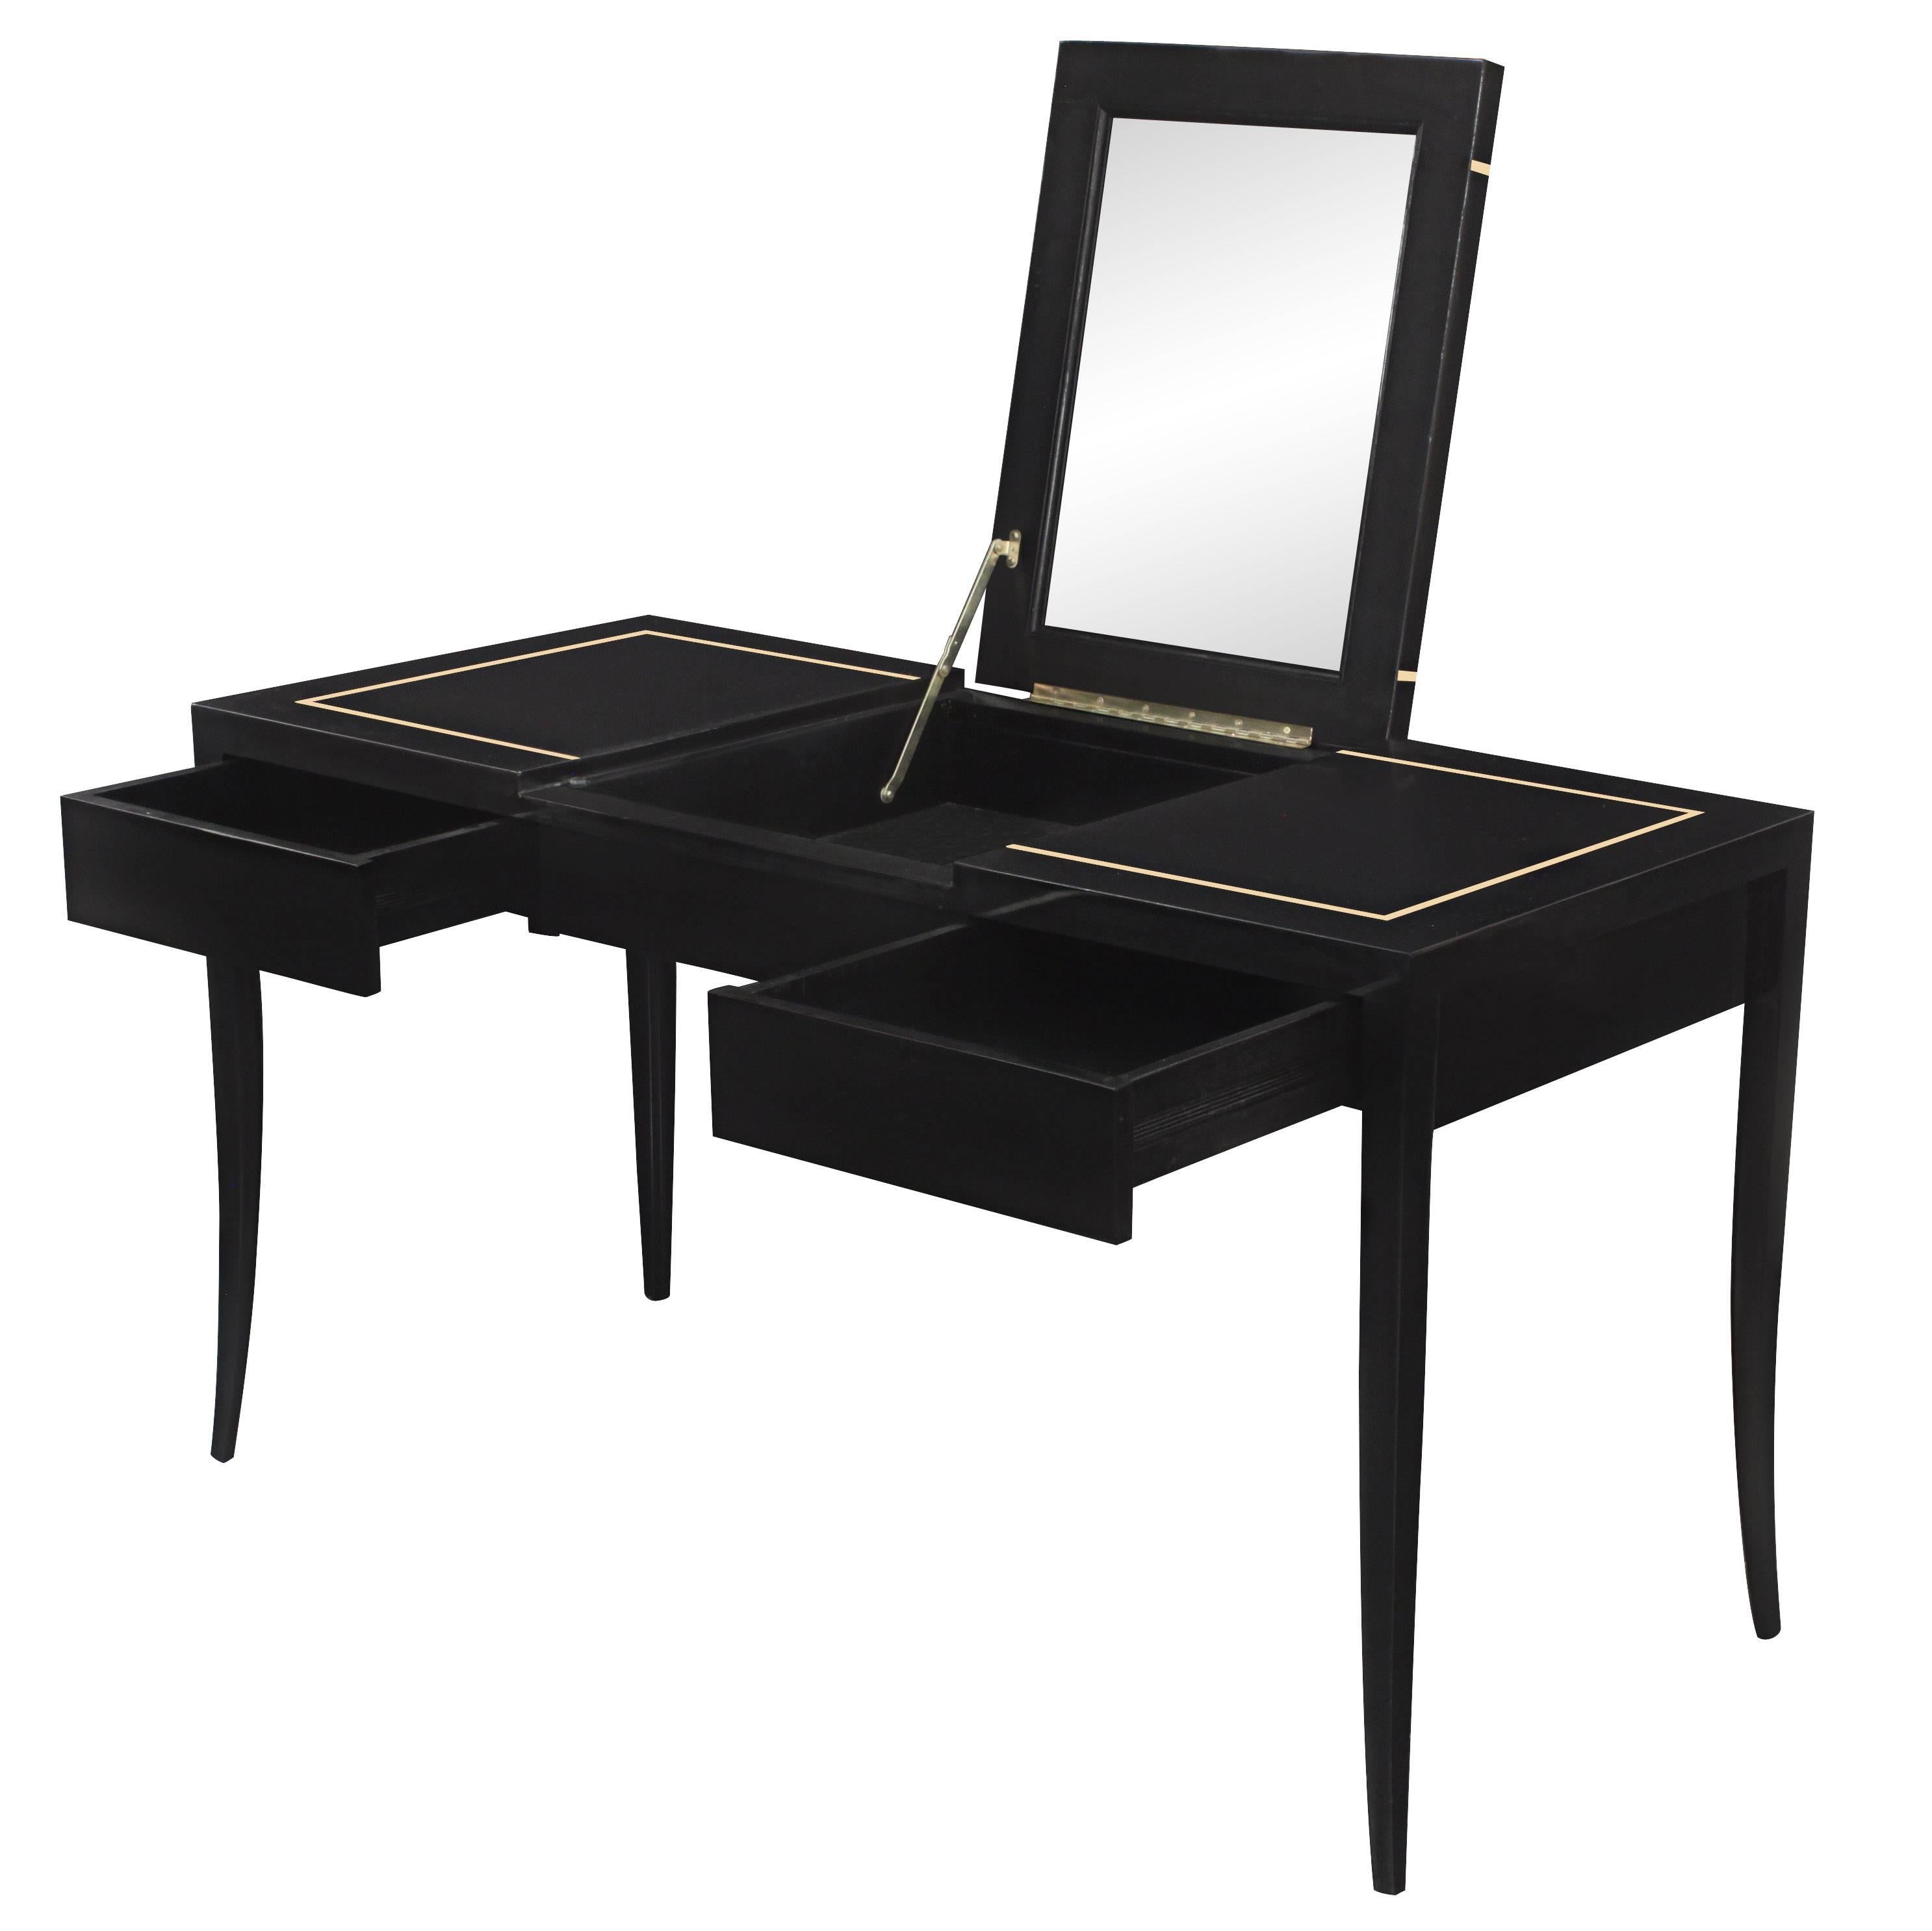 Elegant lady's vanity model no. #303, ebonized with gold inlay with flip up mirror top, by Tommi Parzinger for Parzinger Originals, American, 1950s.
 